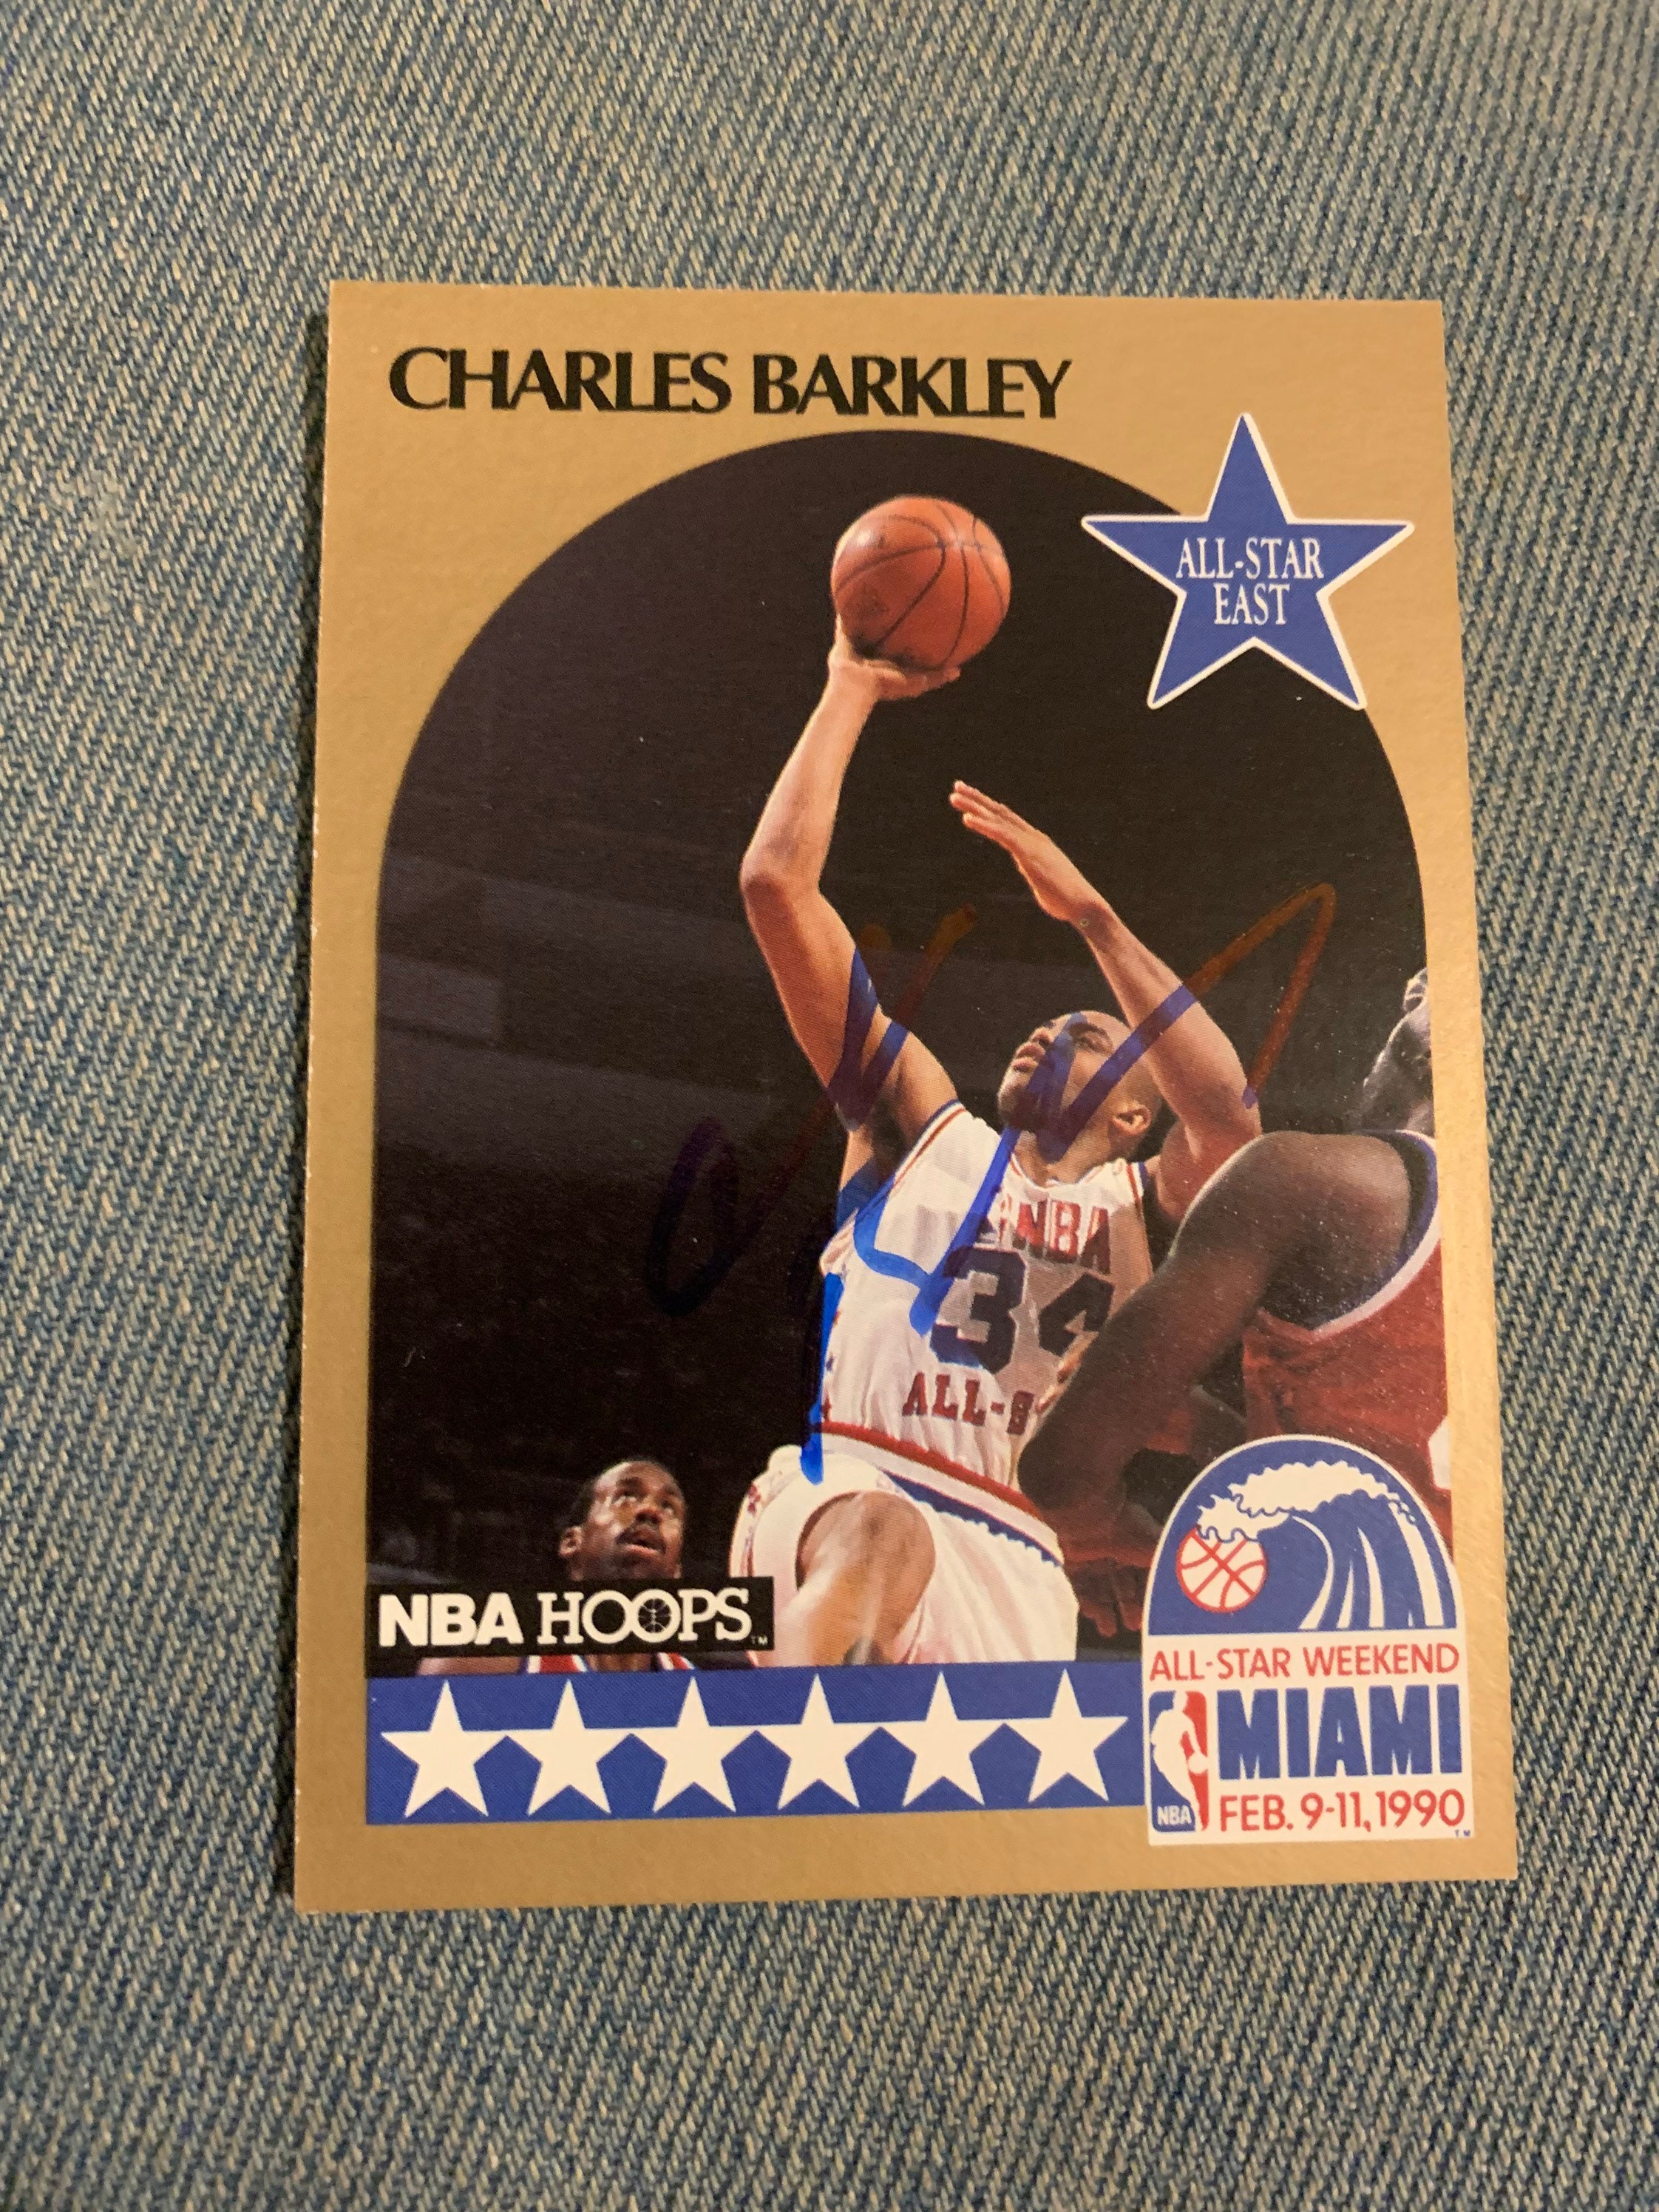 SIXERS WILL WIN THE EAST, ALUM CHARLES BARKLEY SAYS!